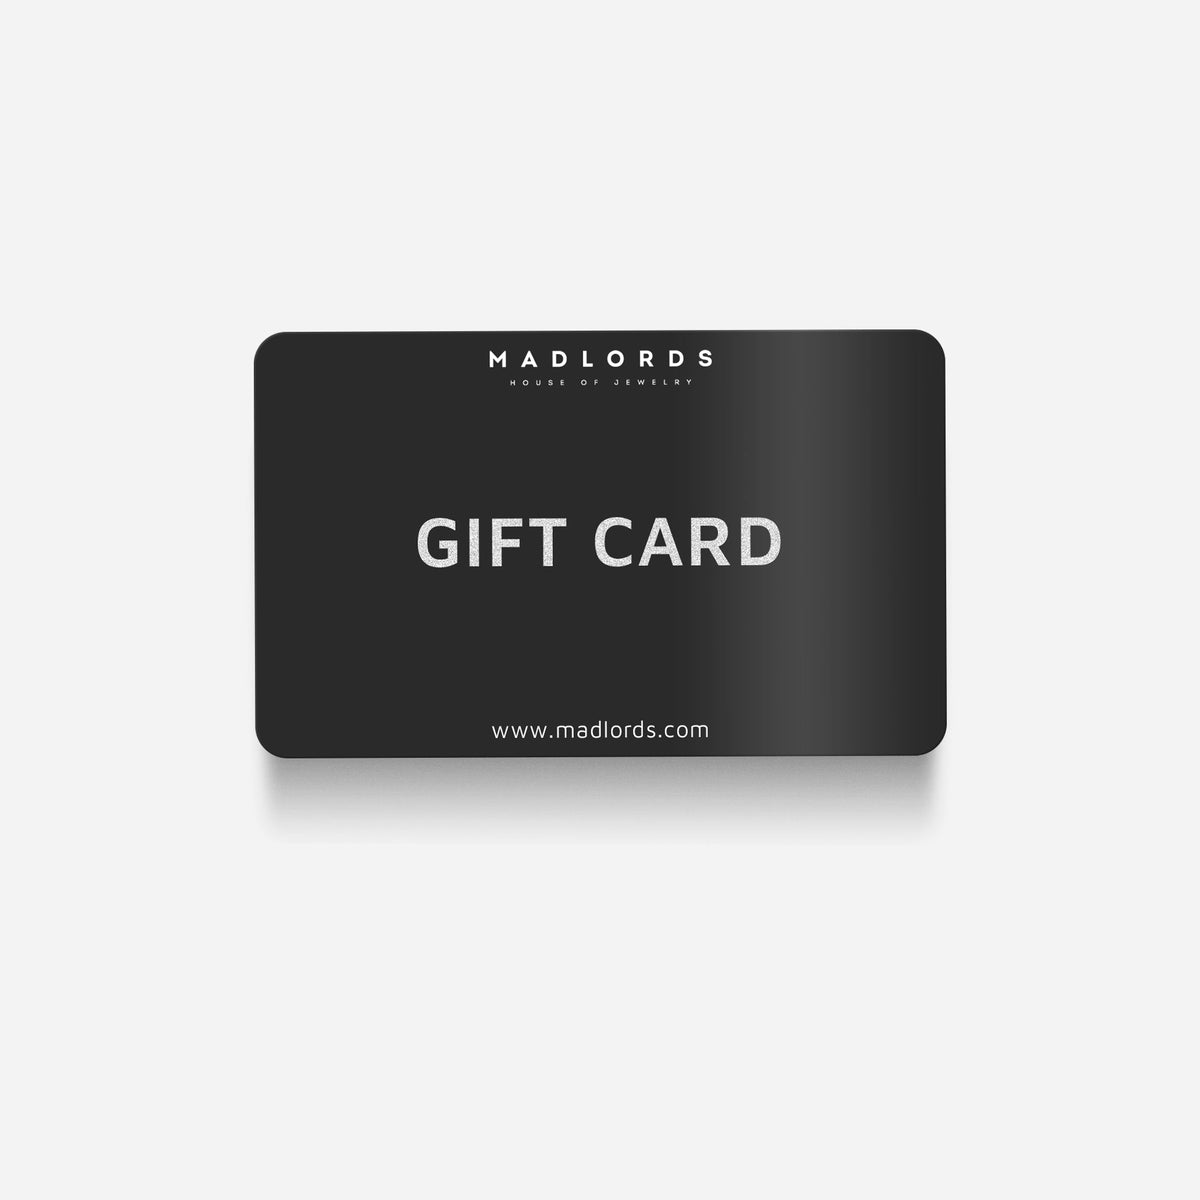 OFFER A GIFT CARD